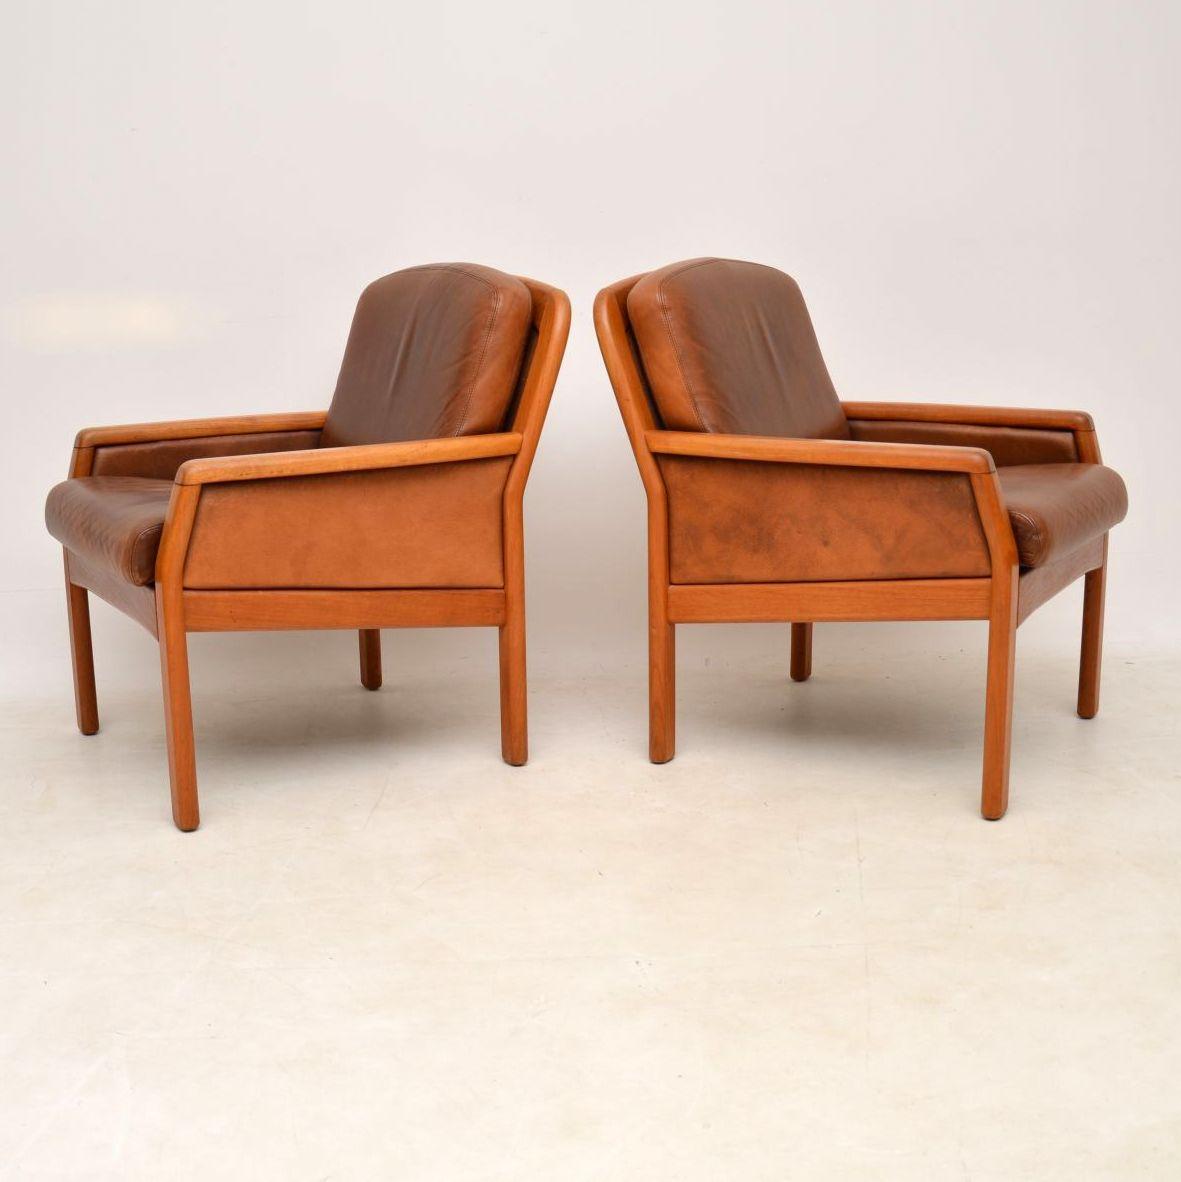 Mid-20th Century 1960s Pair of Danish Teak and Leather Armchairs